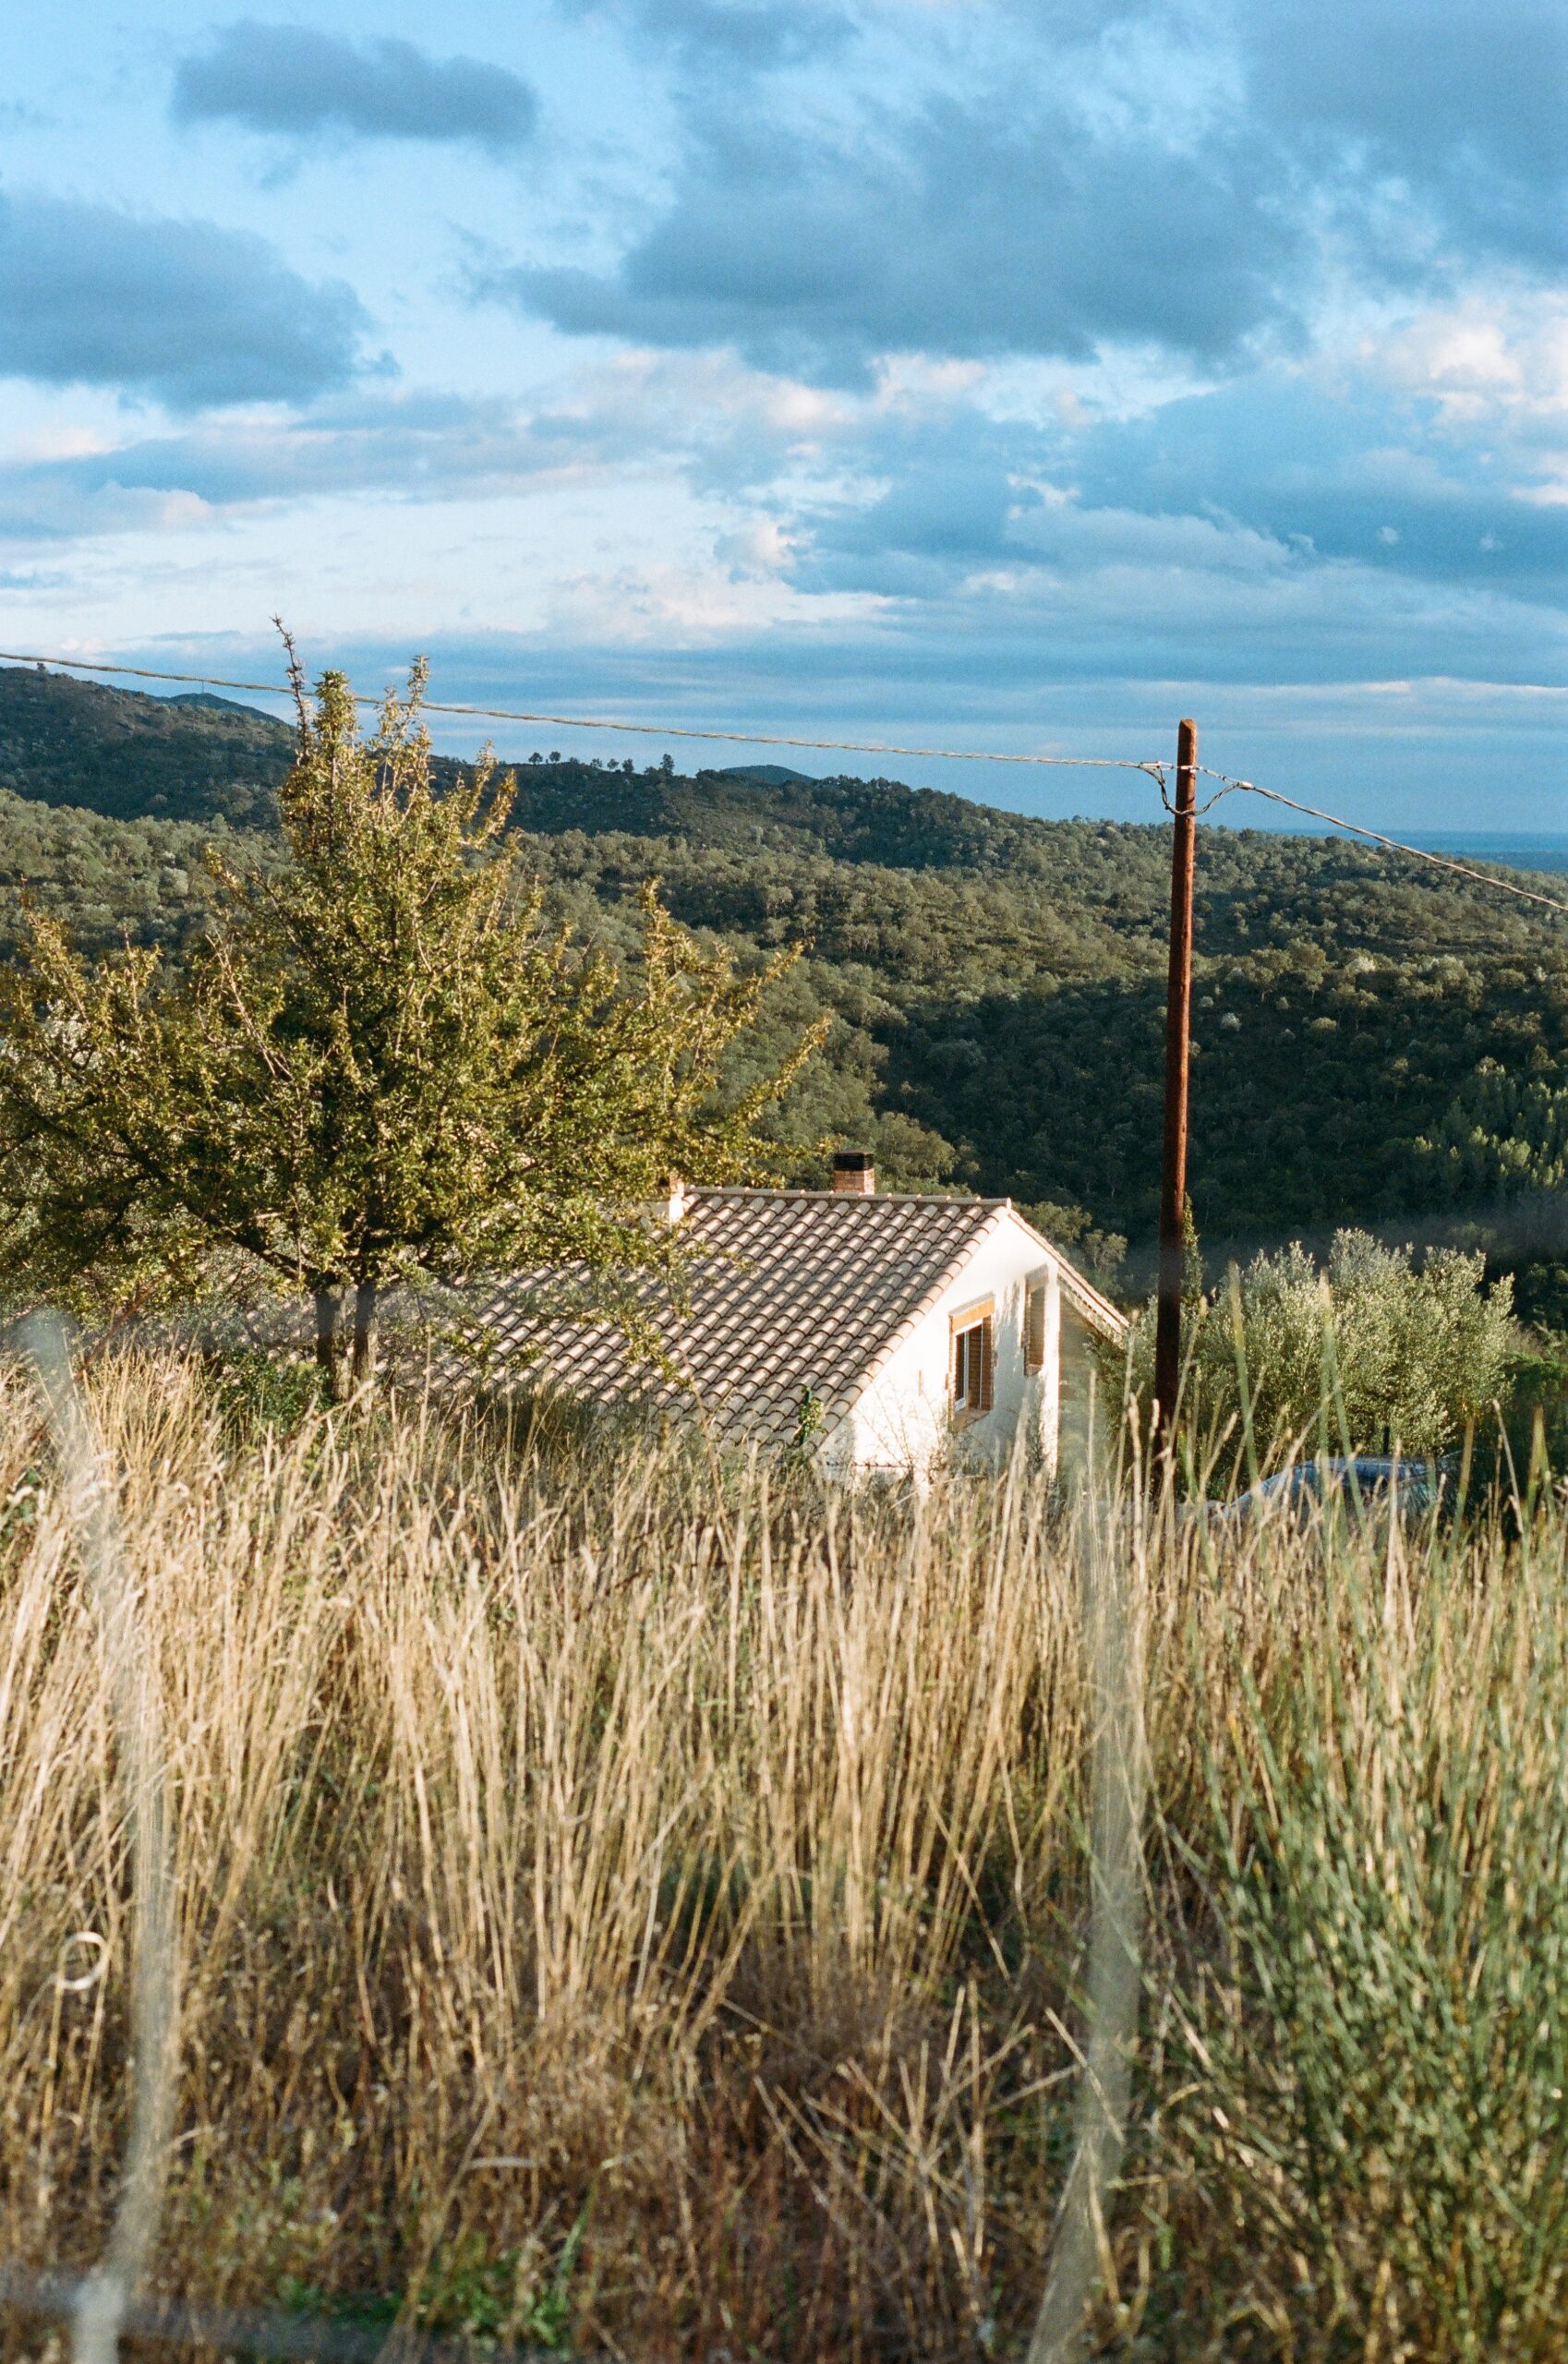 A photo of a house in a grassy area, with hills and a blue sky in the background